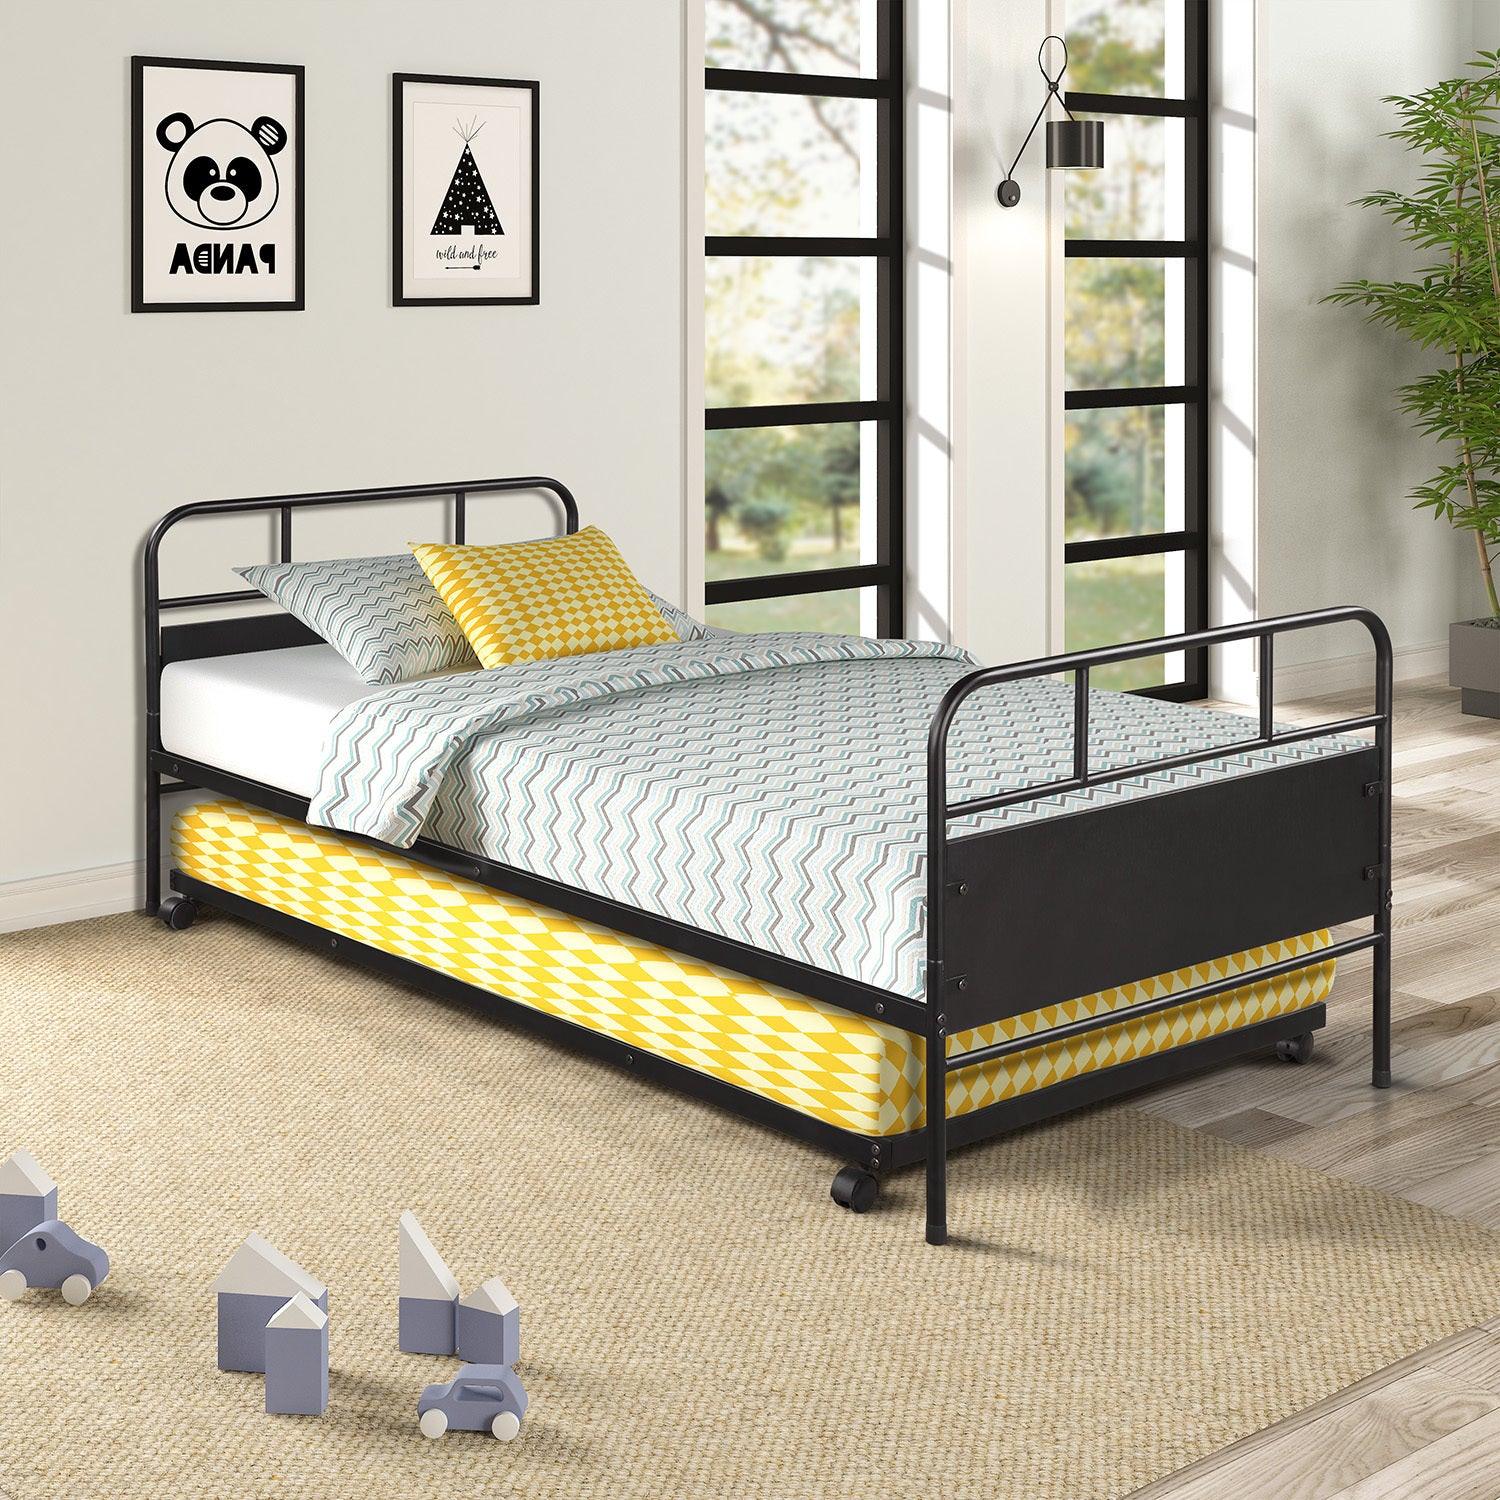 🆓🚛 Metal Daybed Platform Bed Frame With Trundle Built-in Casters, Twin Size